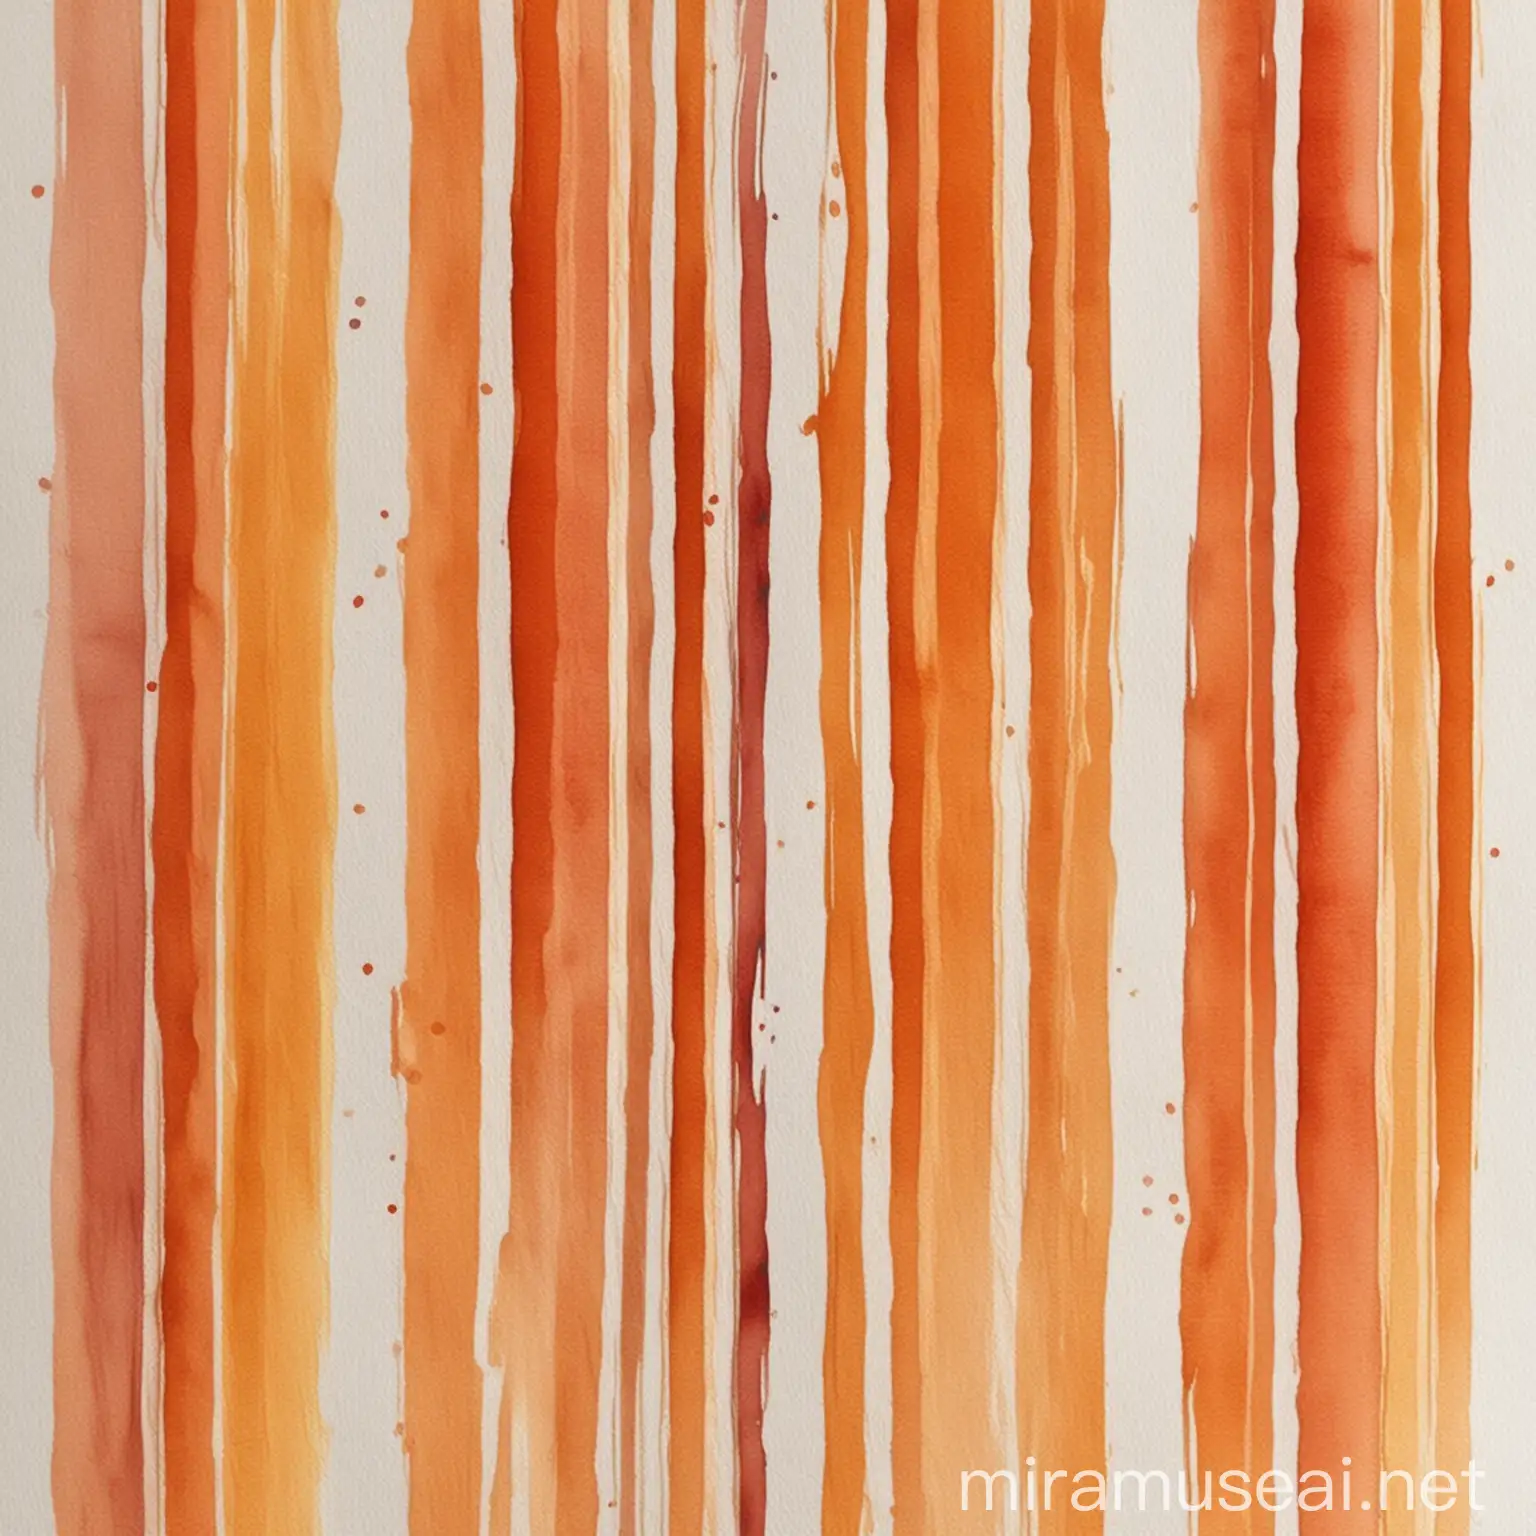 FlameColored Watercolor Painting Vertical Stripes in Warm Tones